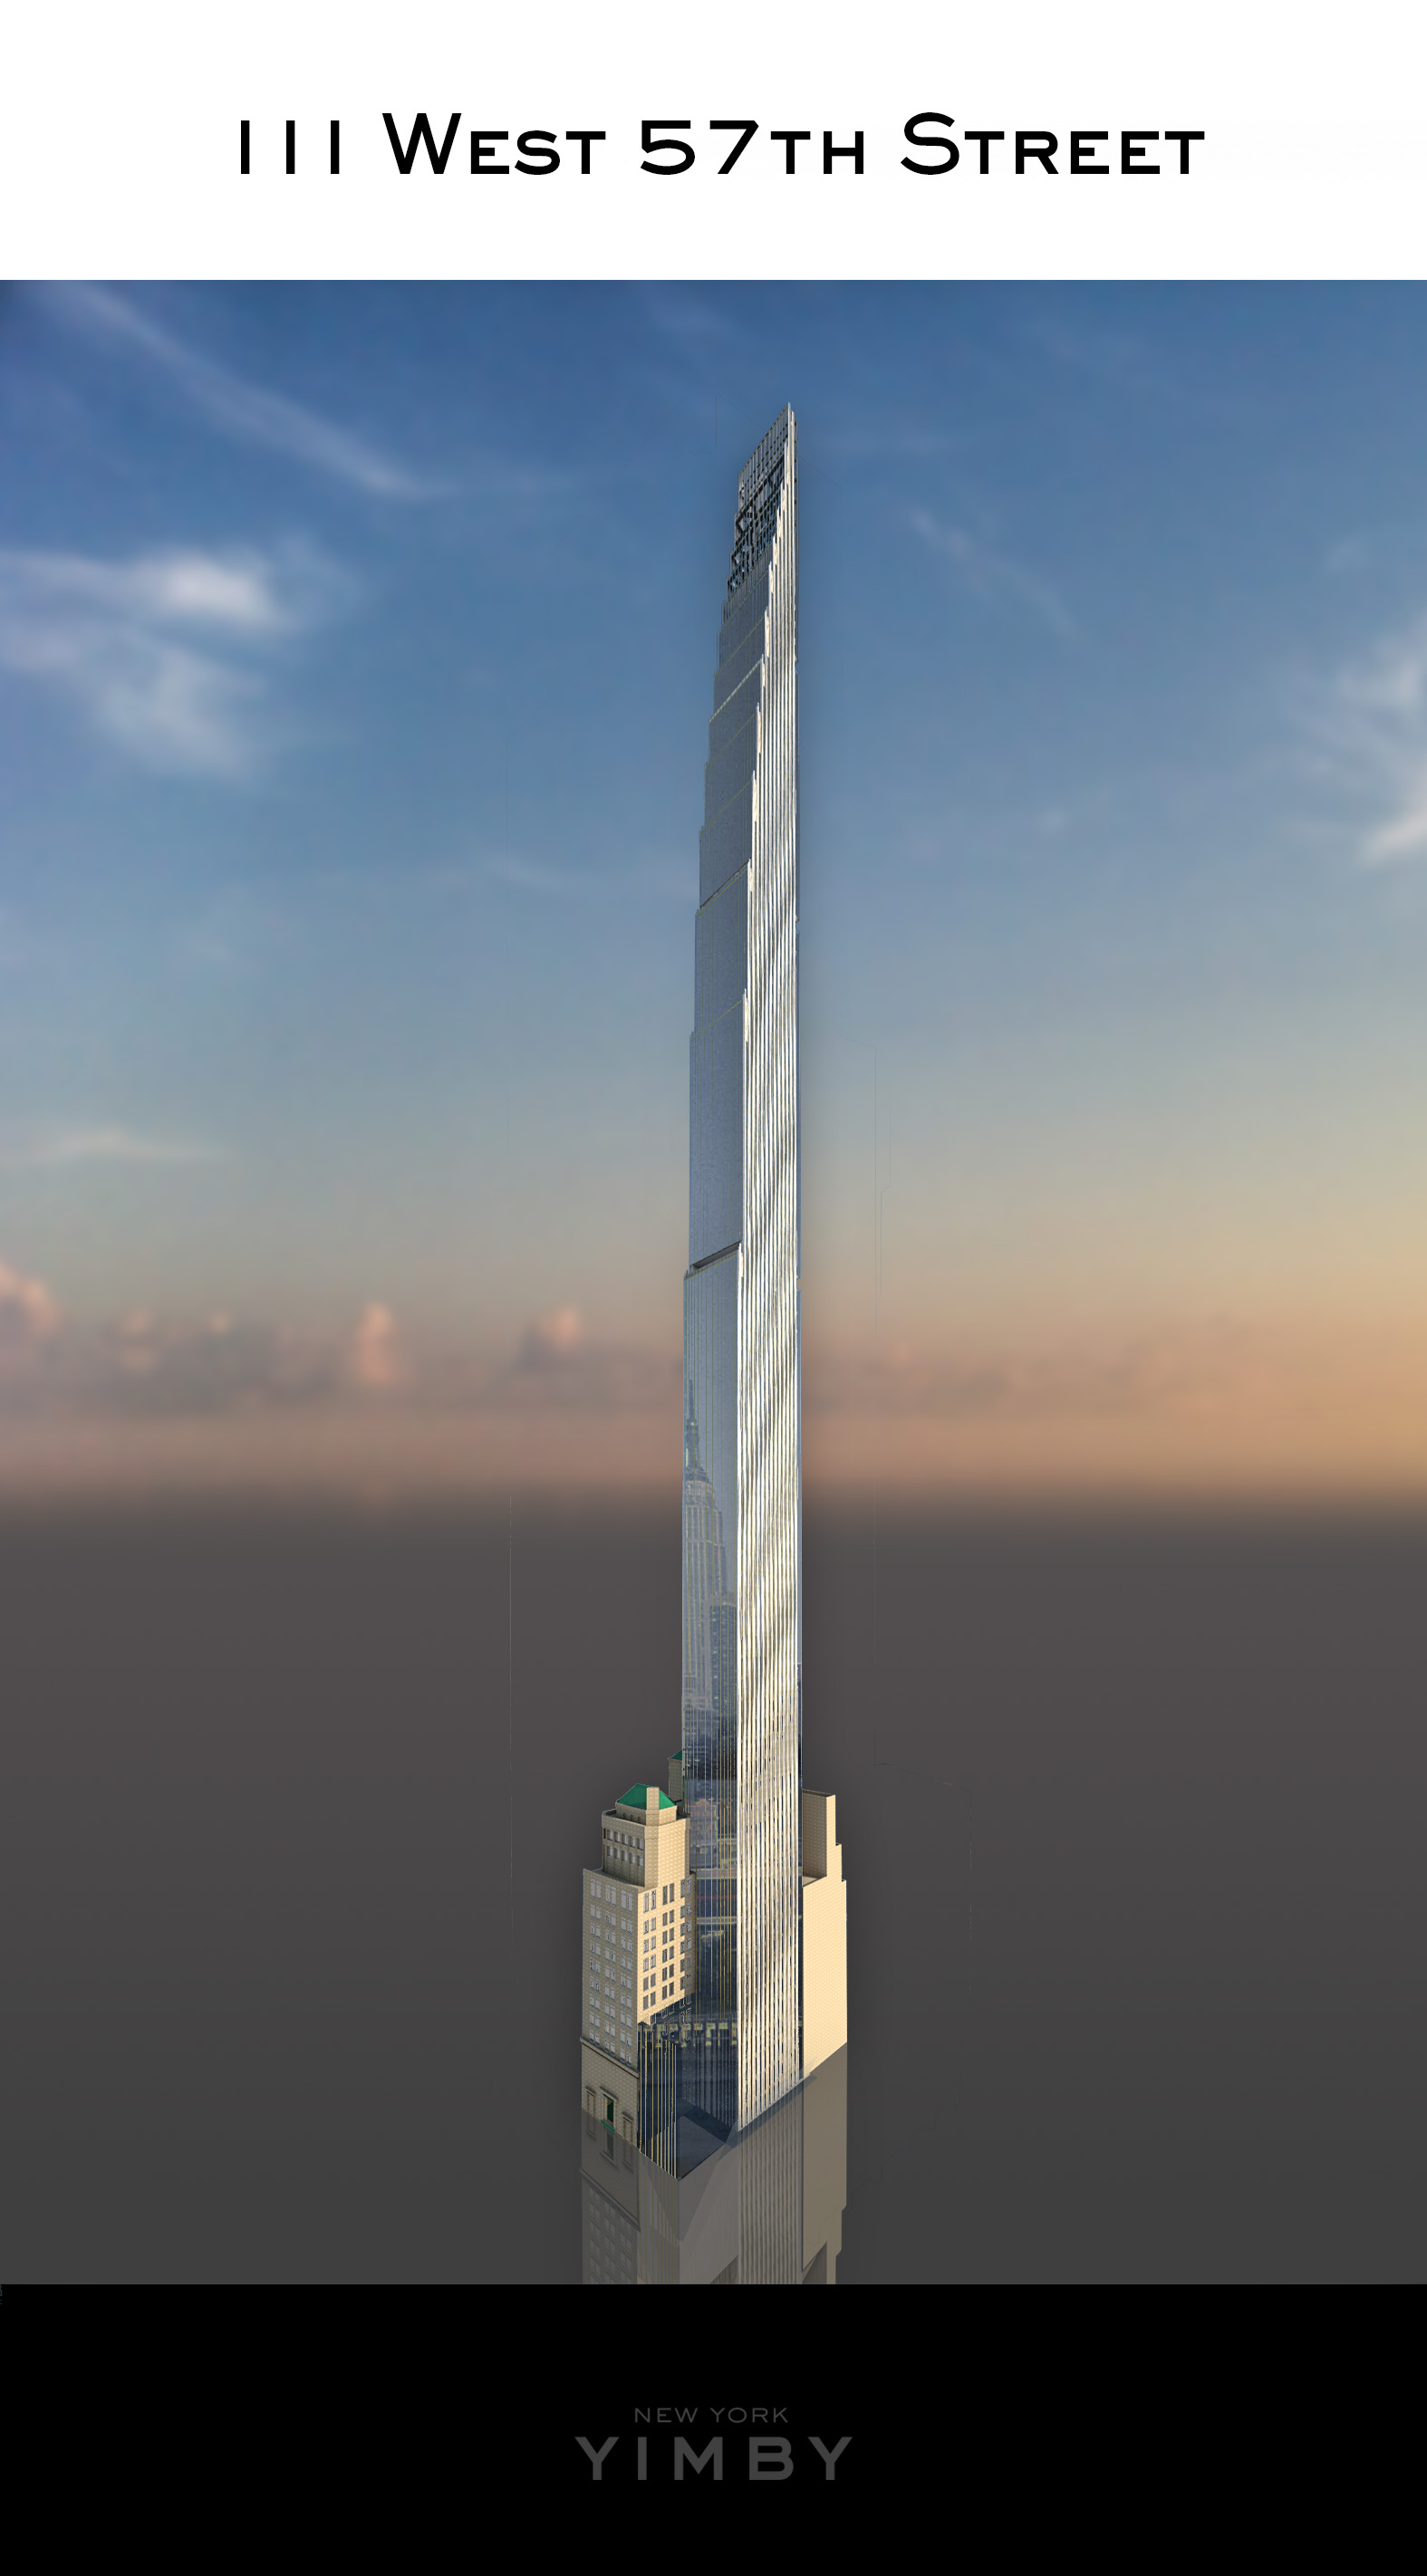 Supertall 111 West 57th Street Rises Seven Stories in Midtown - New